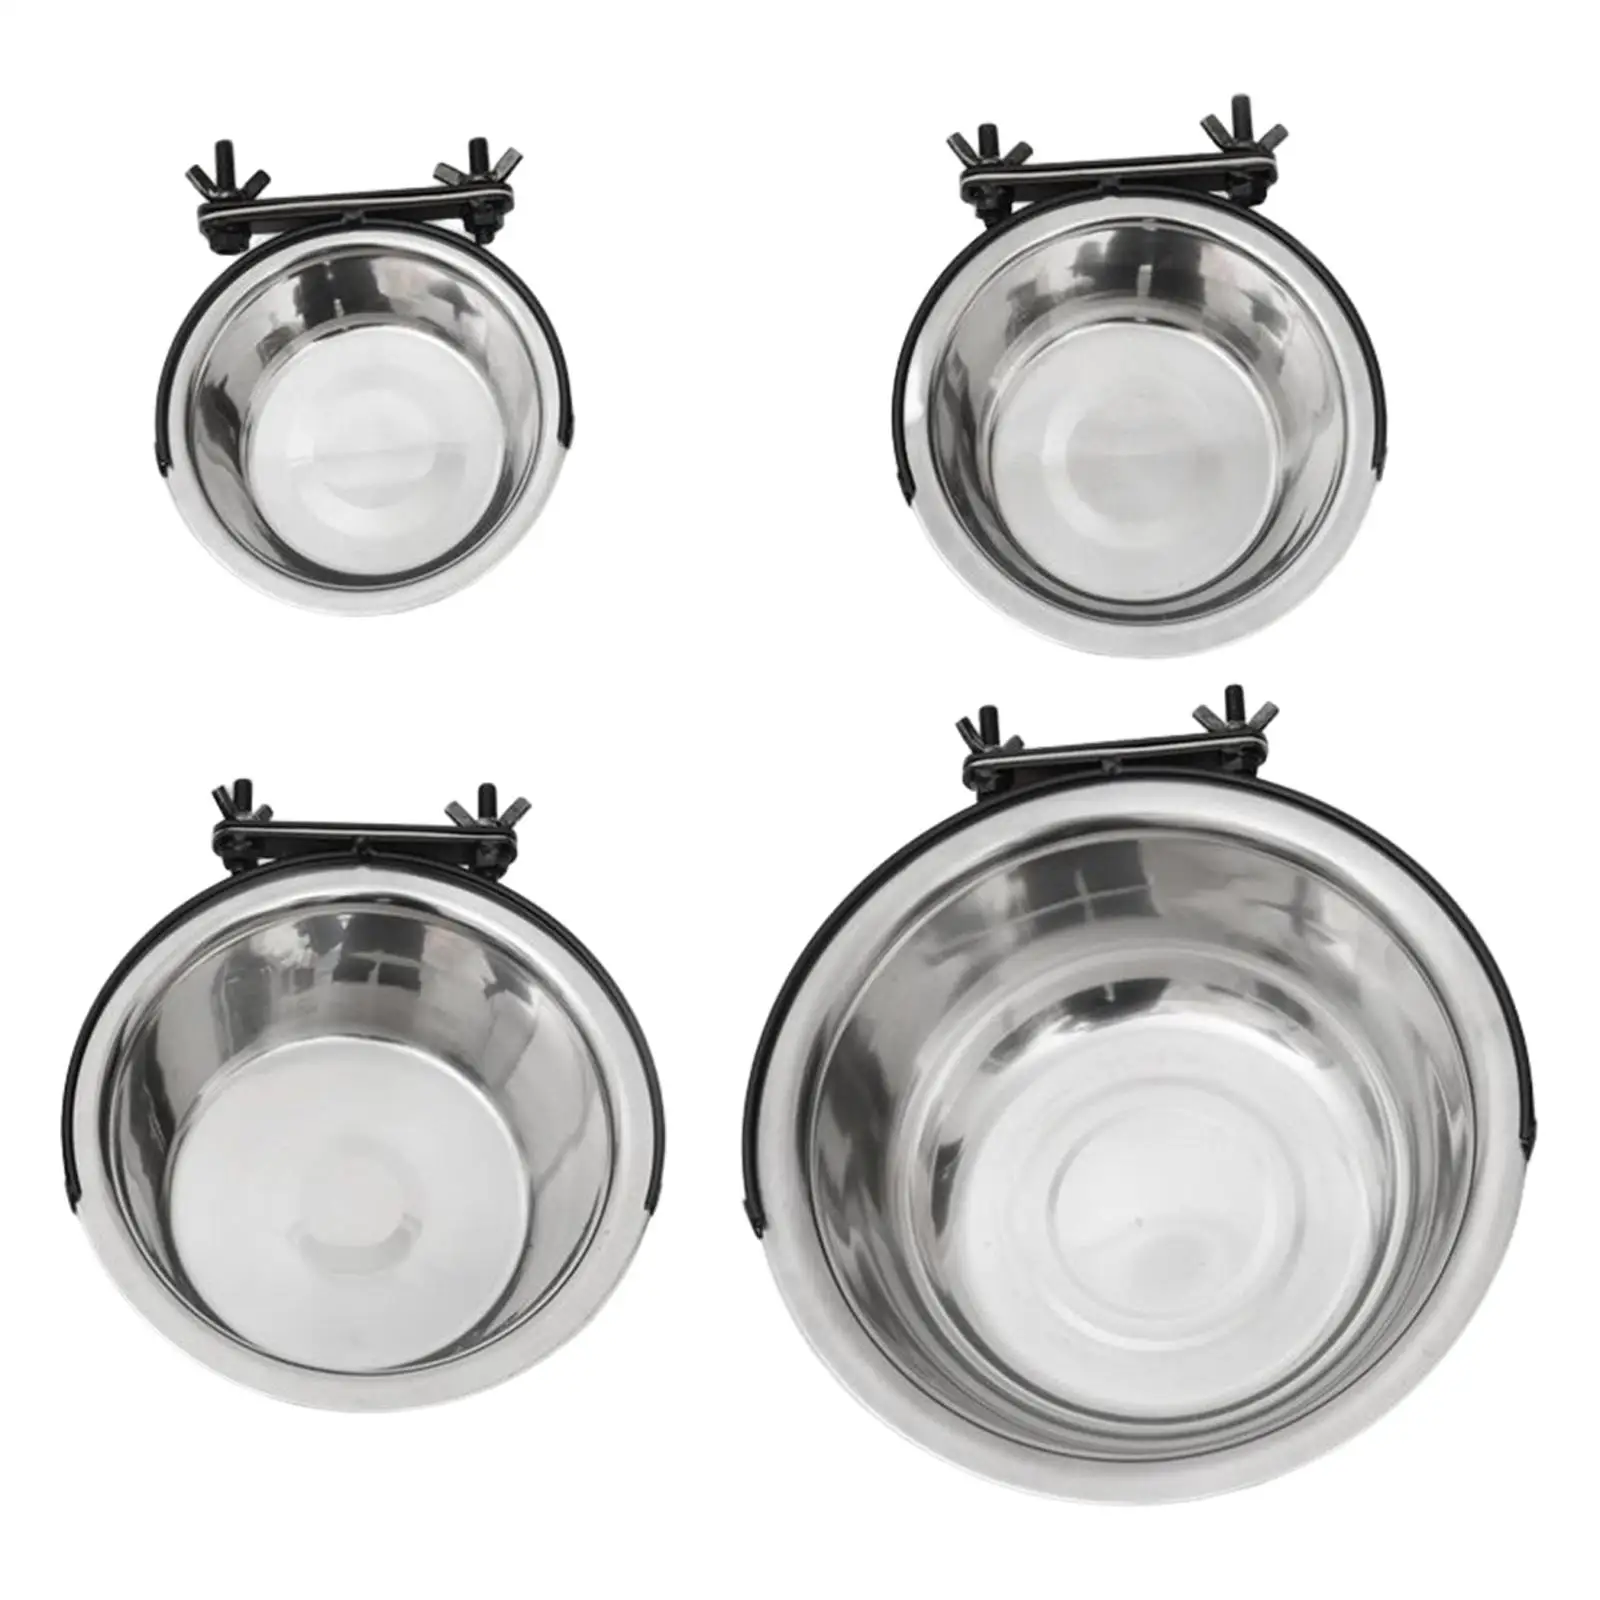 Hanging Pet Bowl Pet Feeding Dish Bowl Stainless Steel with Fixed Bowl Card Slot Cage Water Dish Non Spill Dog Bowls for Rabbit